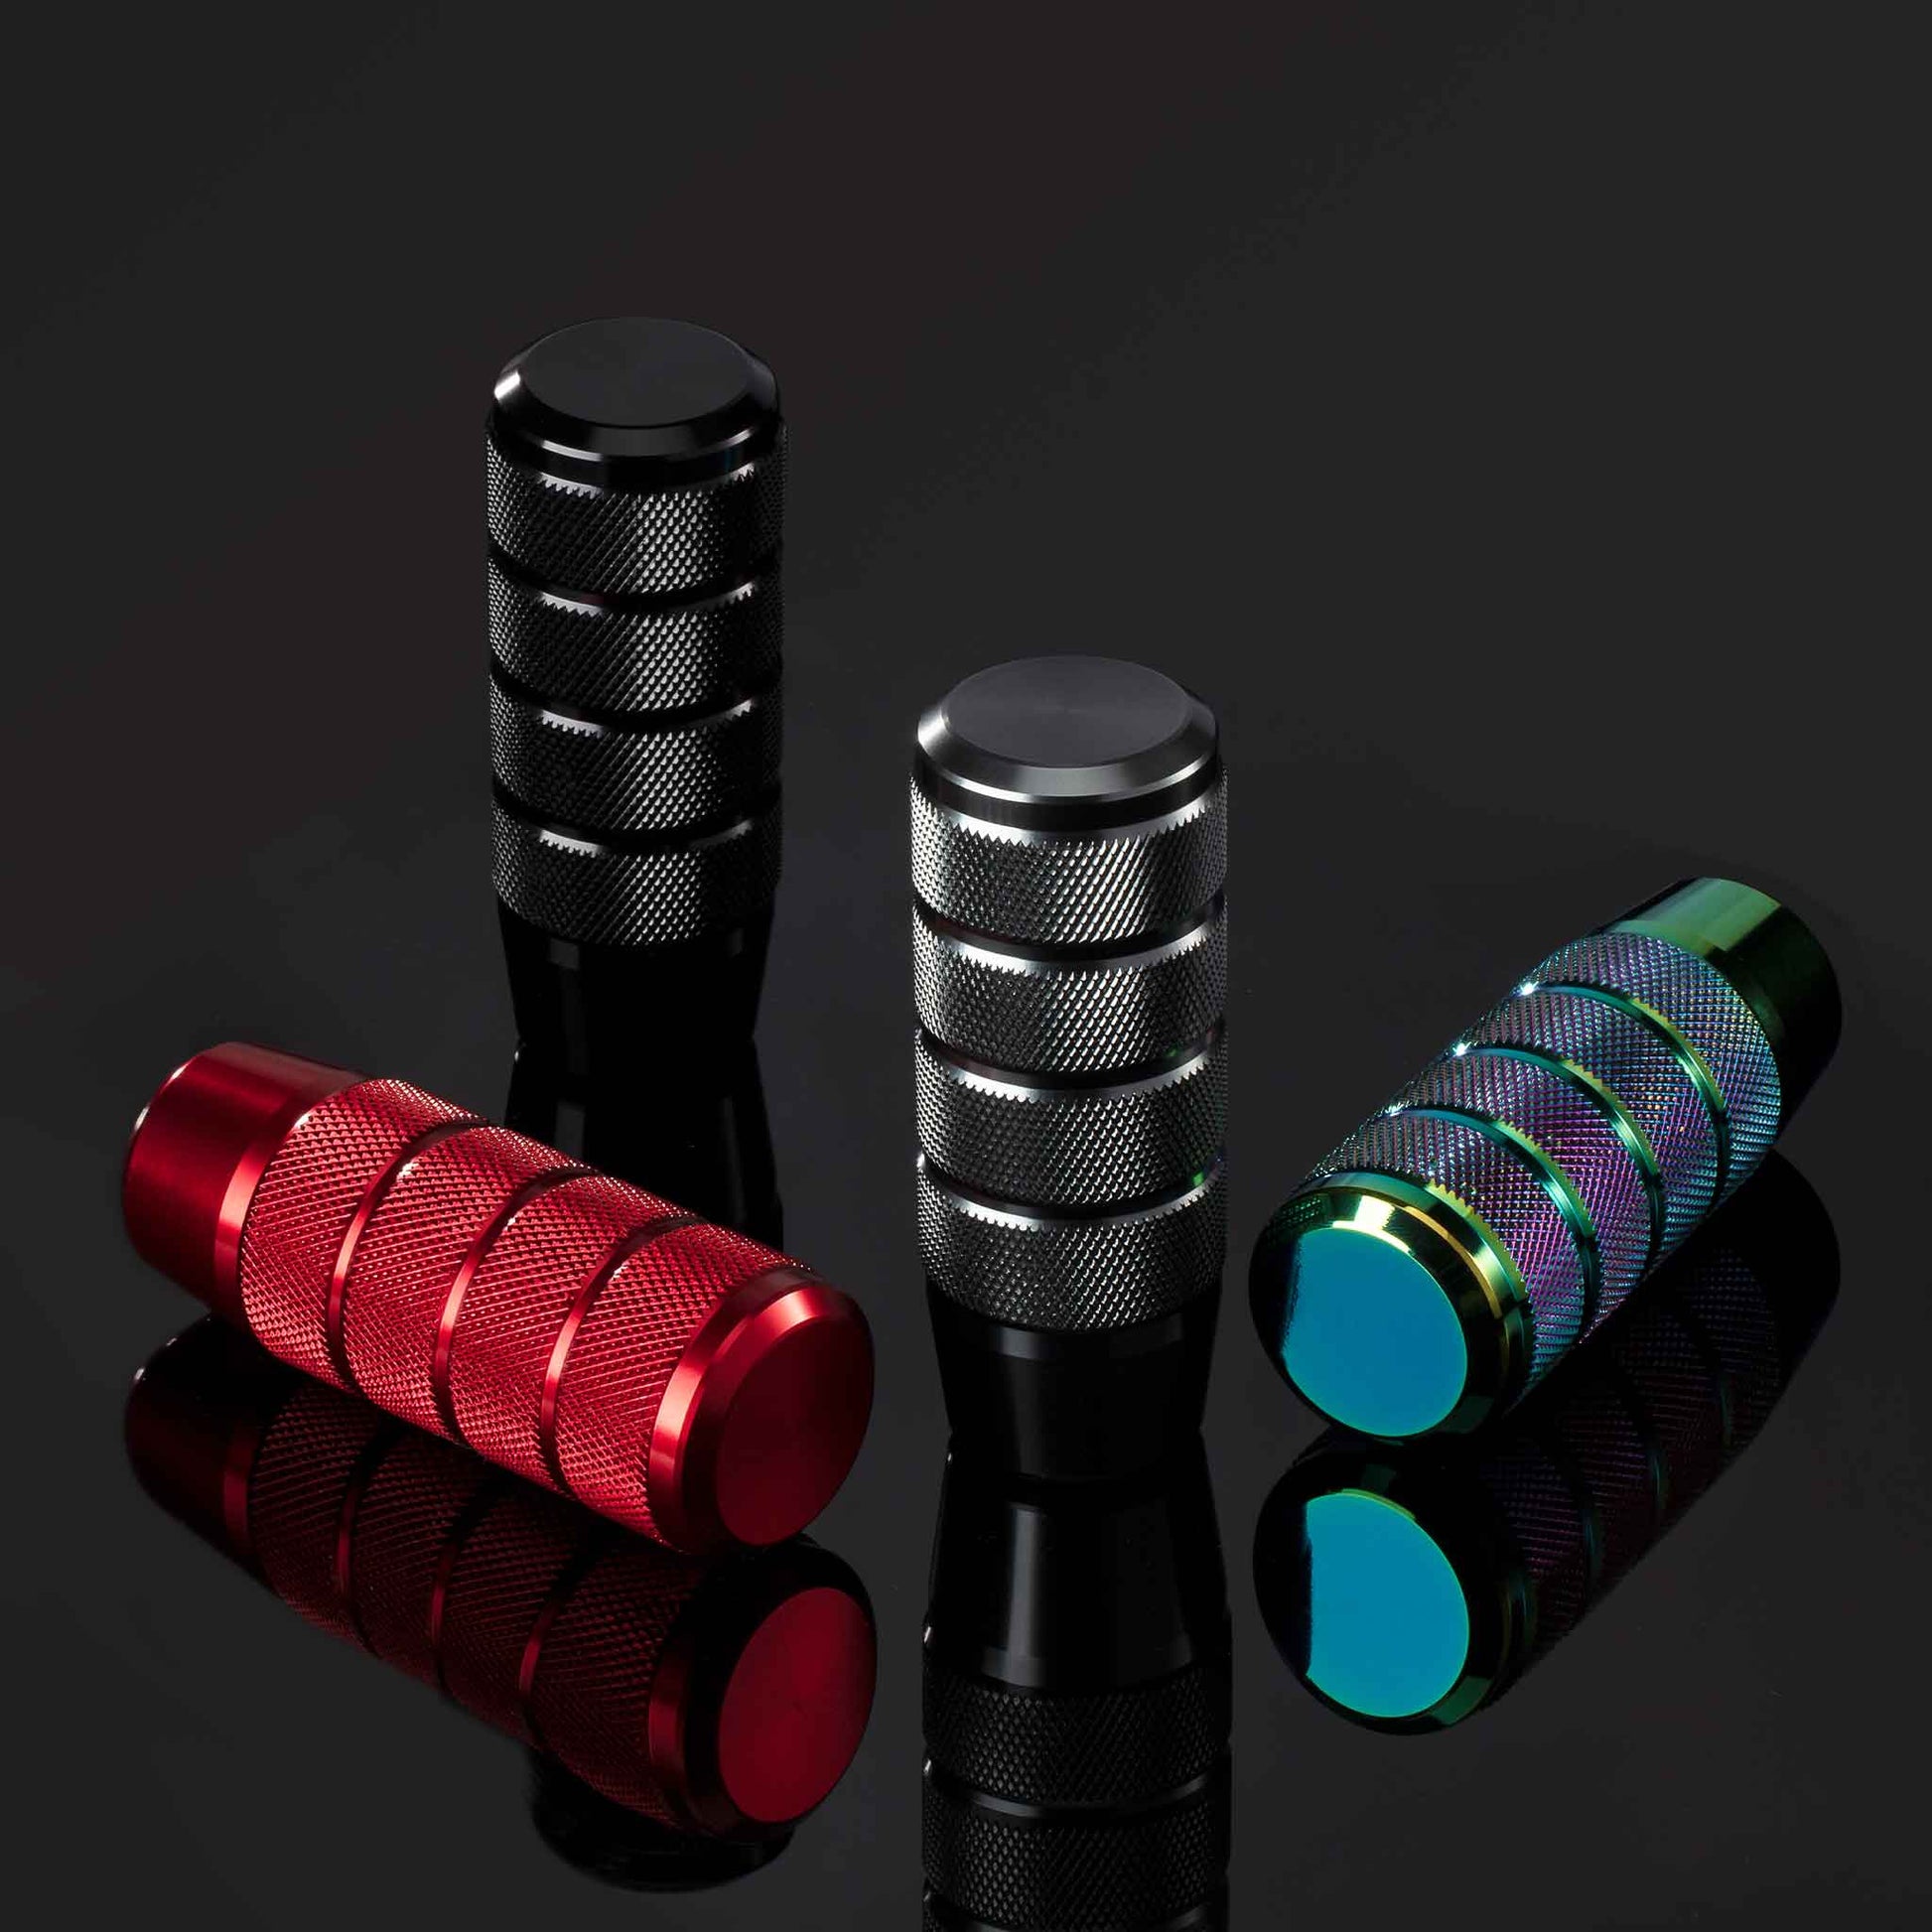 Four knurled grip shift knobs in different colours placed on a reflective object